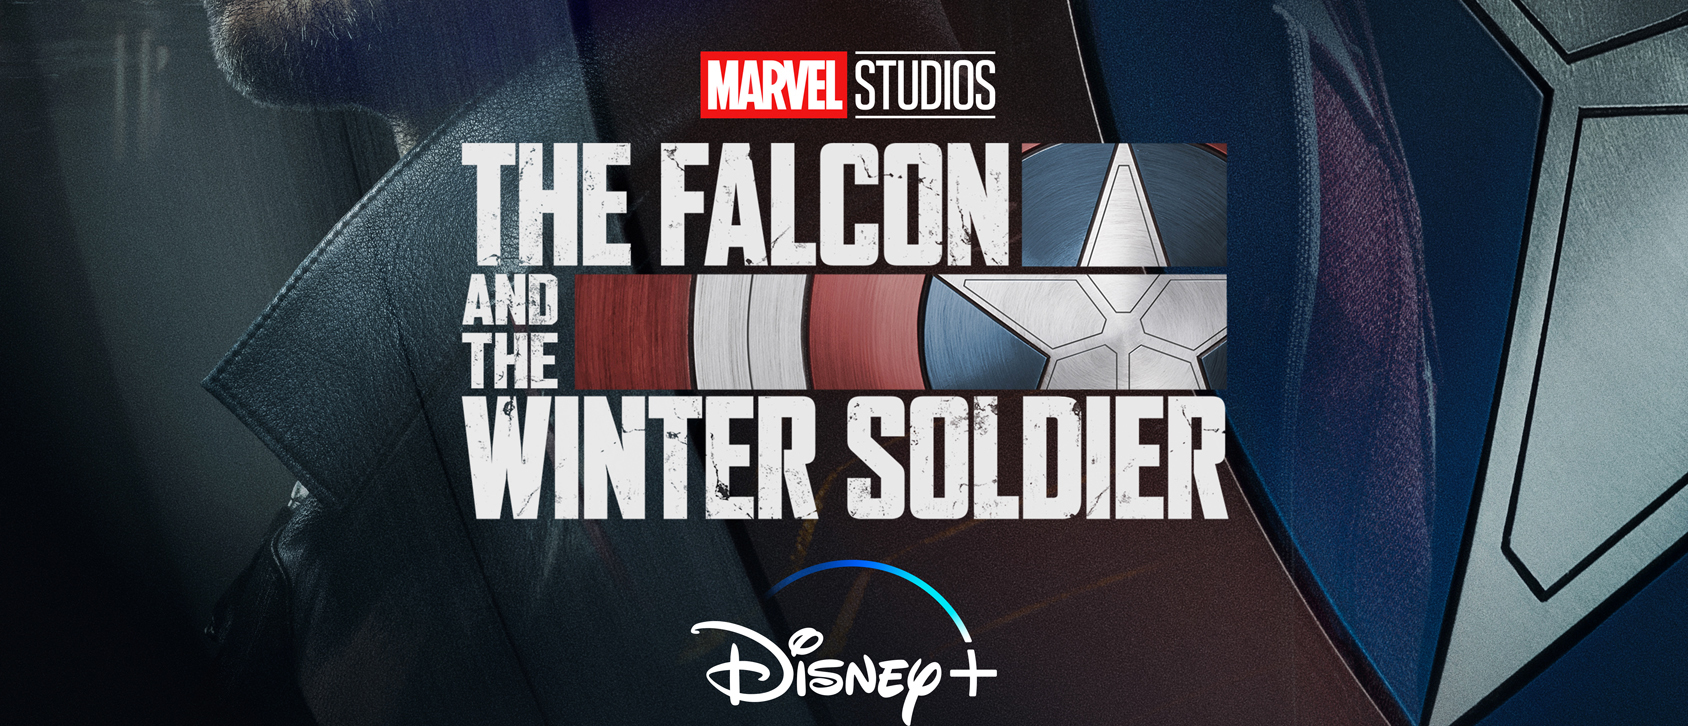 The Falcon And The Winter Soldier See The Longer Trailer